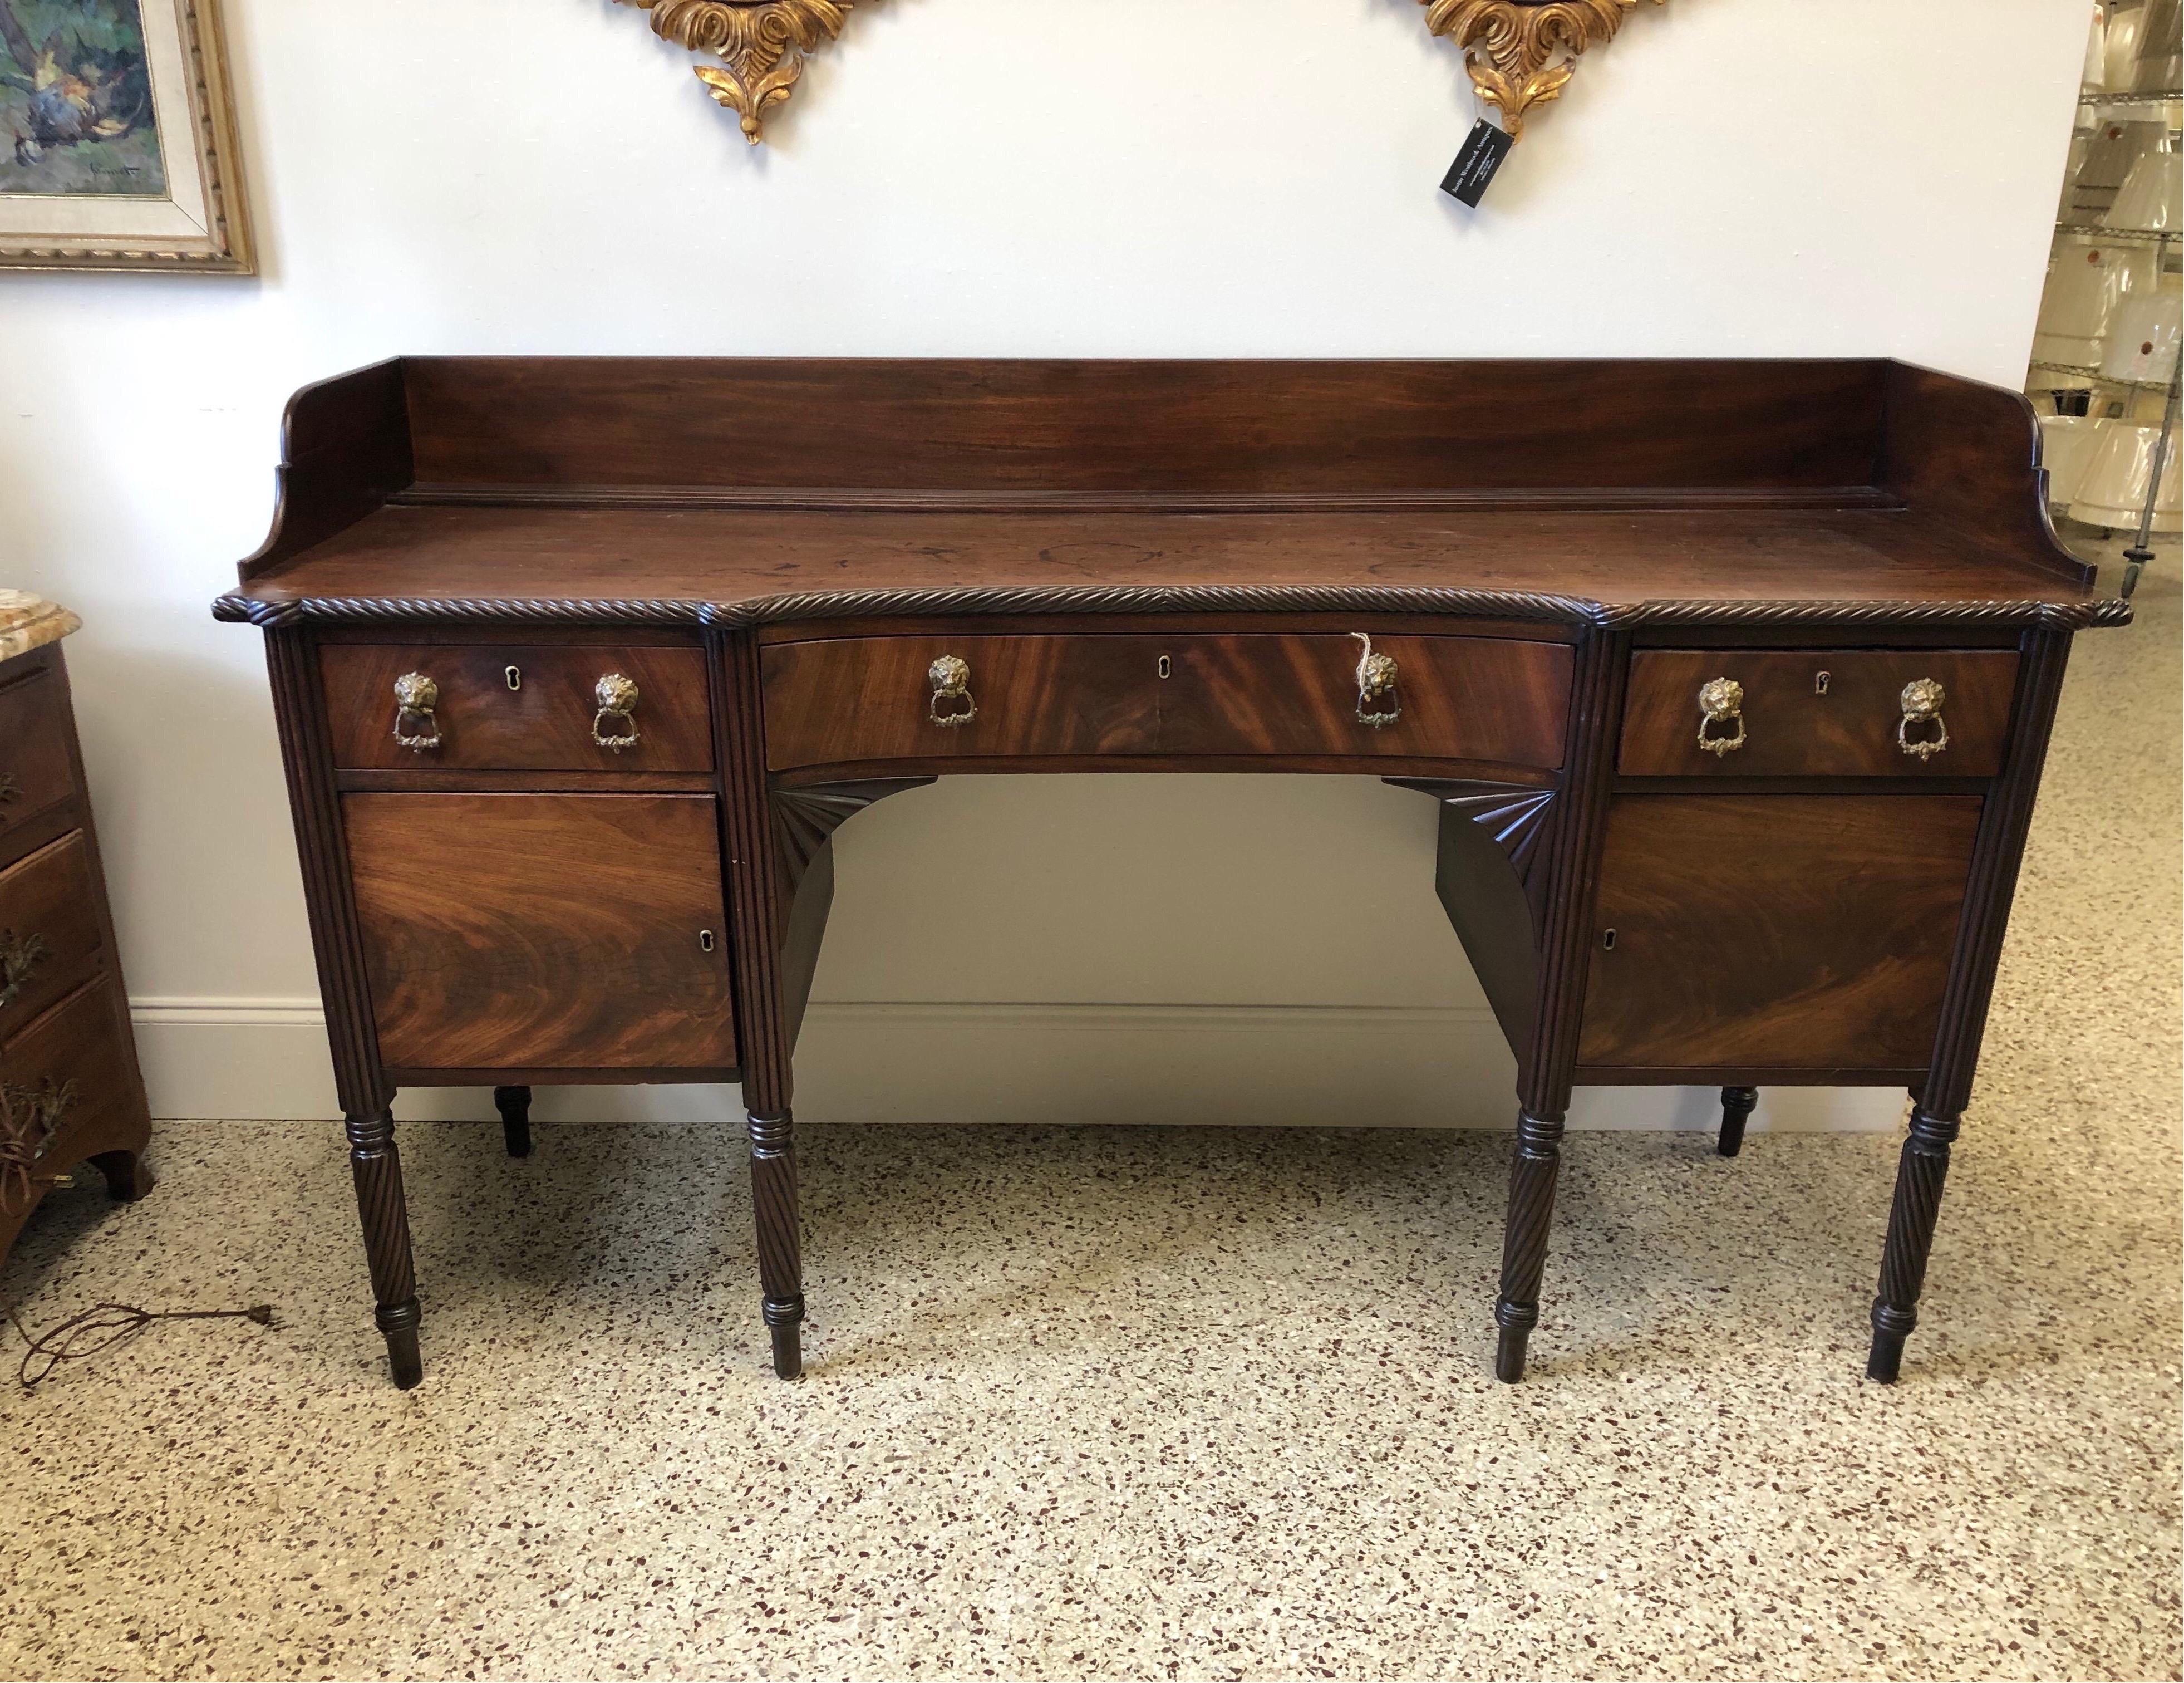 19th century English Regency carved mahogany sideboard. Shaped top with rope twist edge and backsplash. Concave center drawer with fan spandrel apron, flanked by single drawer and cabinet on each side. Reeded stiles, ring turned spiral legs ,